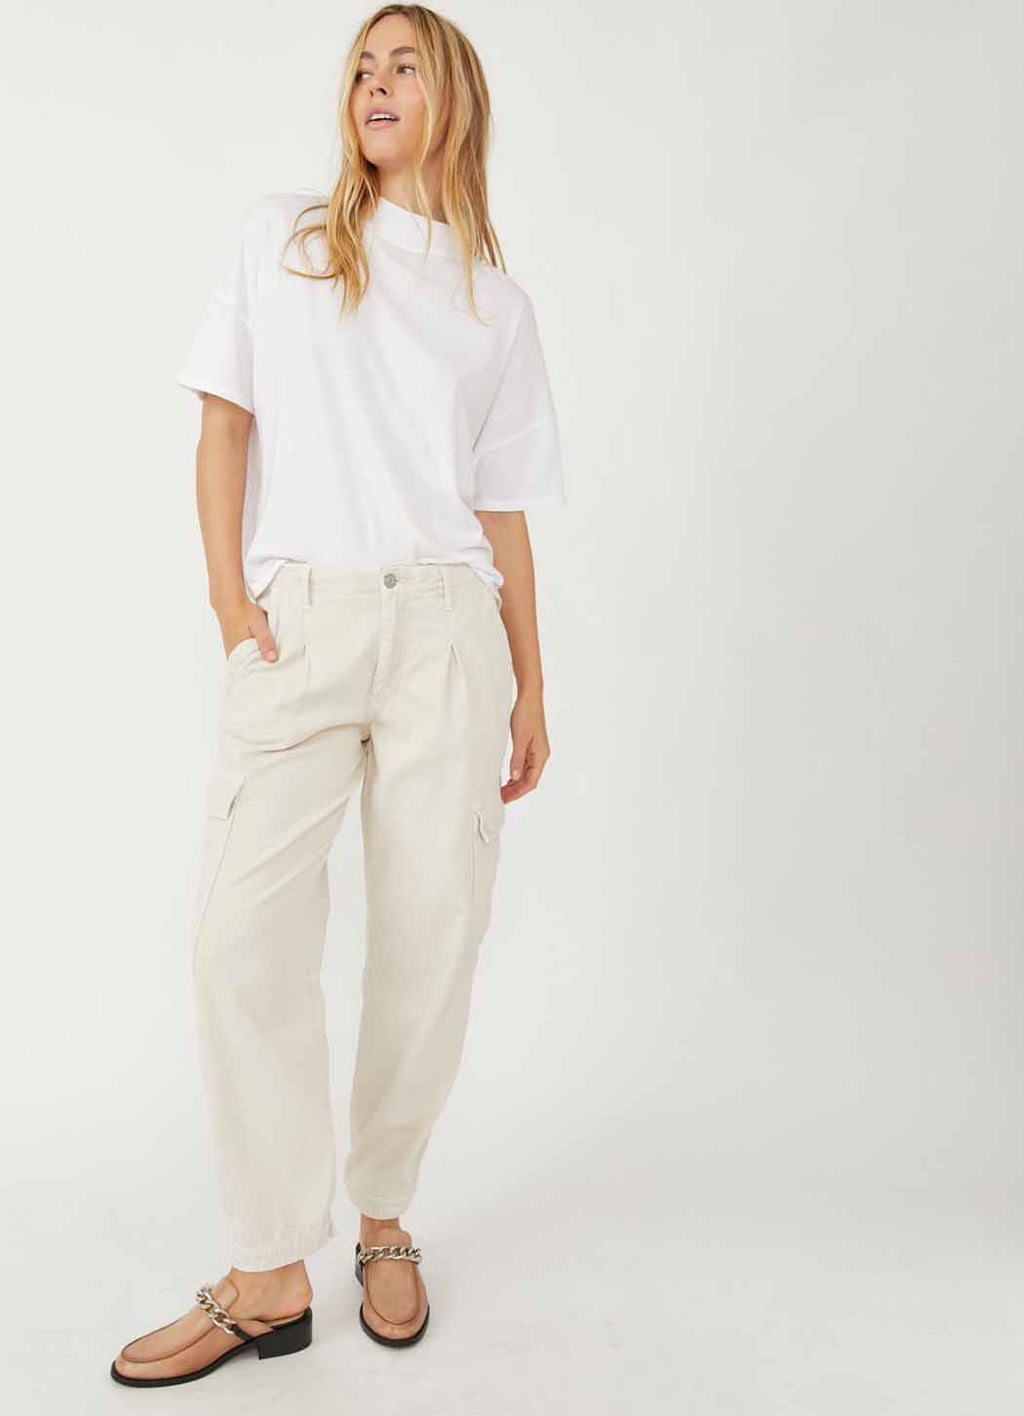 Free People - Utility meets chic. Shop the South Bay Utility Cargo